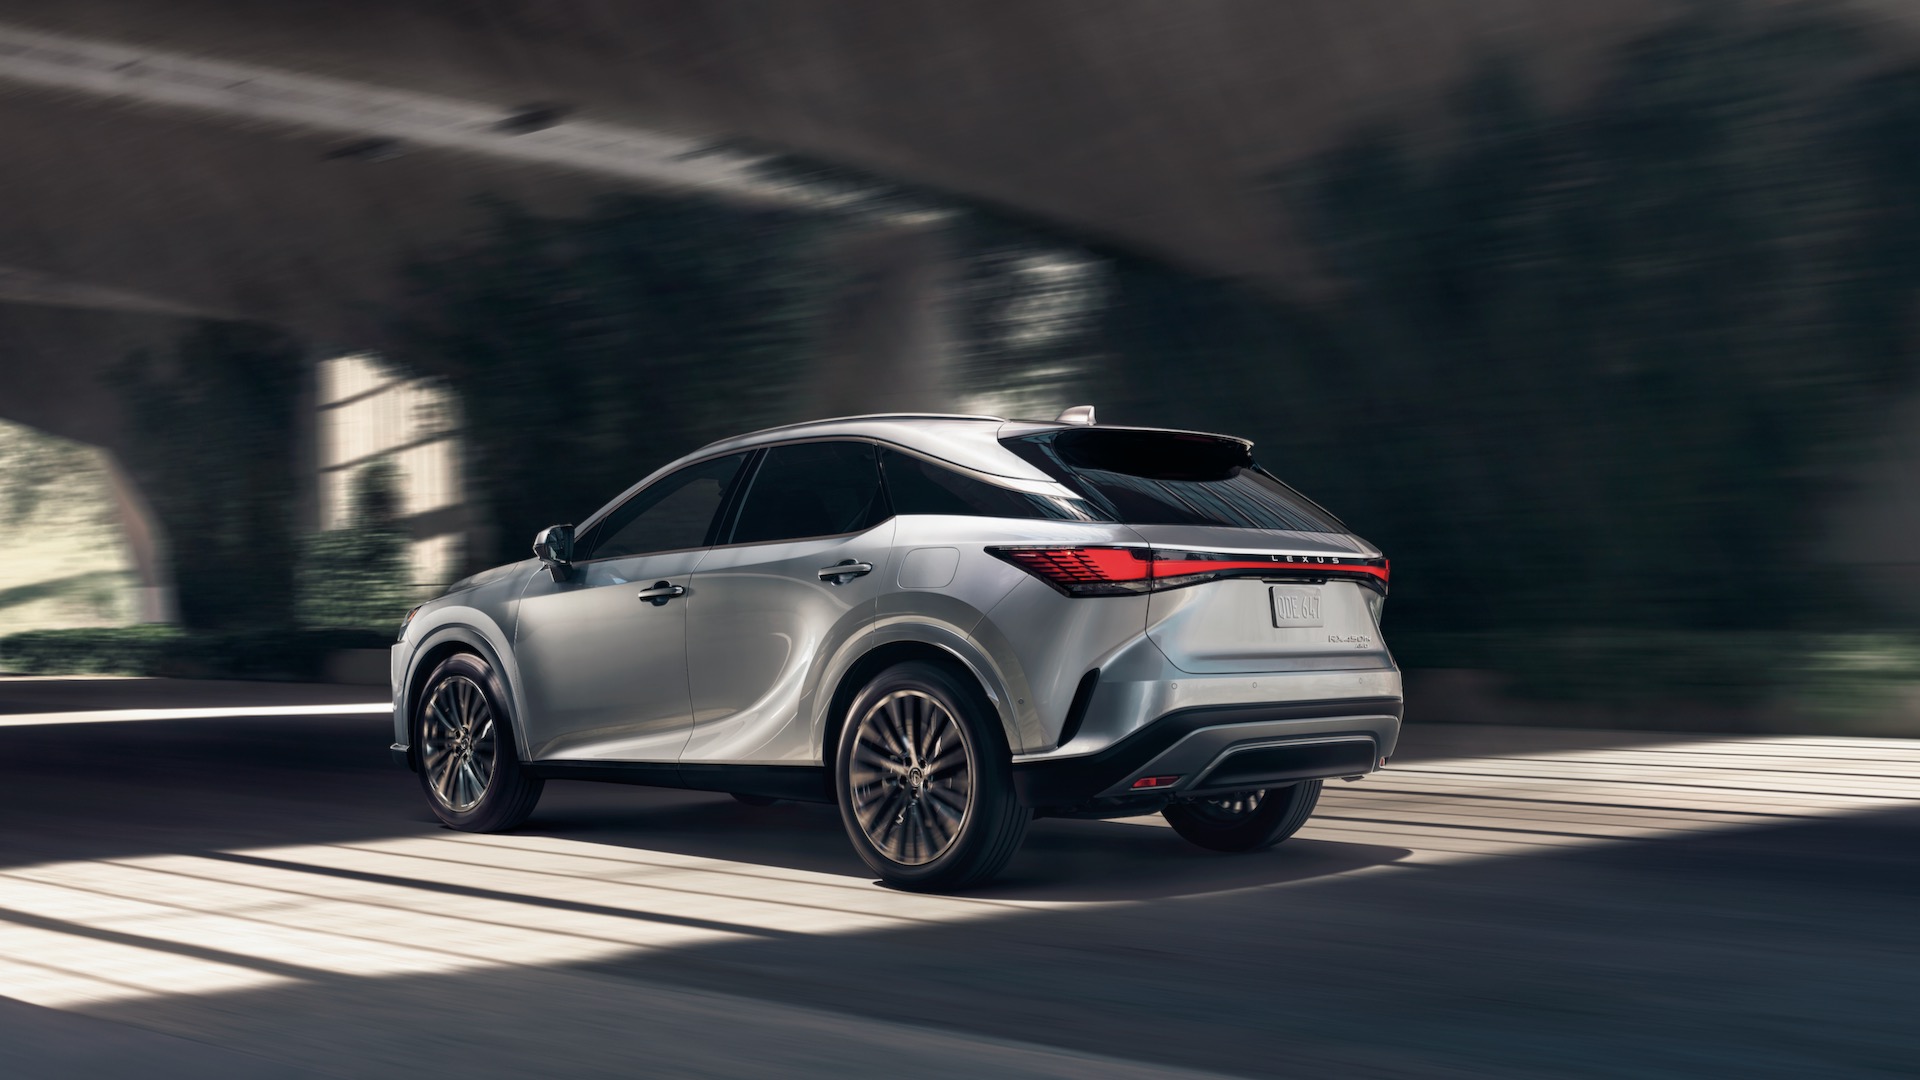 2024 Lexus RX 450h+ PHEV 35 electrical miles, 35 mpg, due late 2023